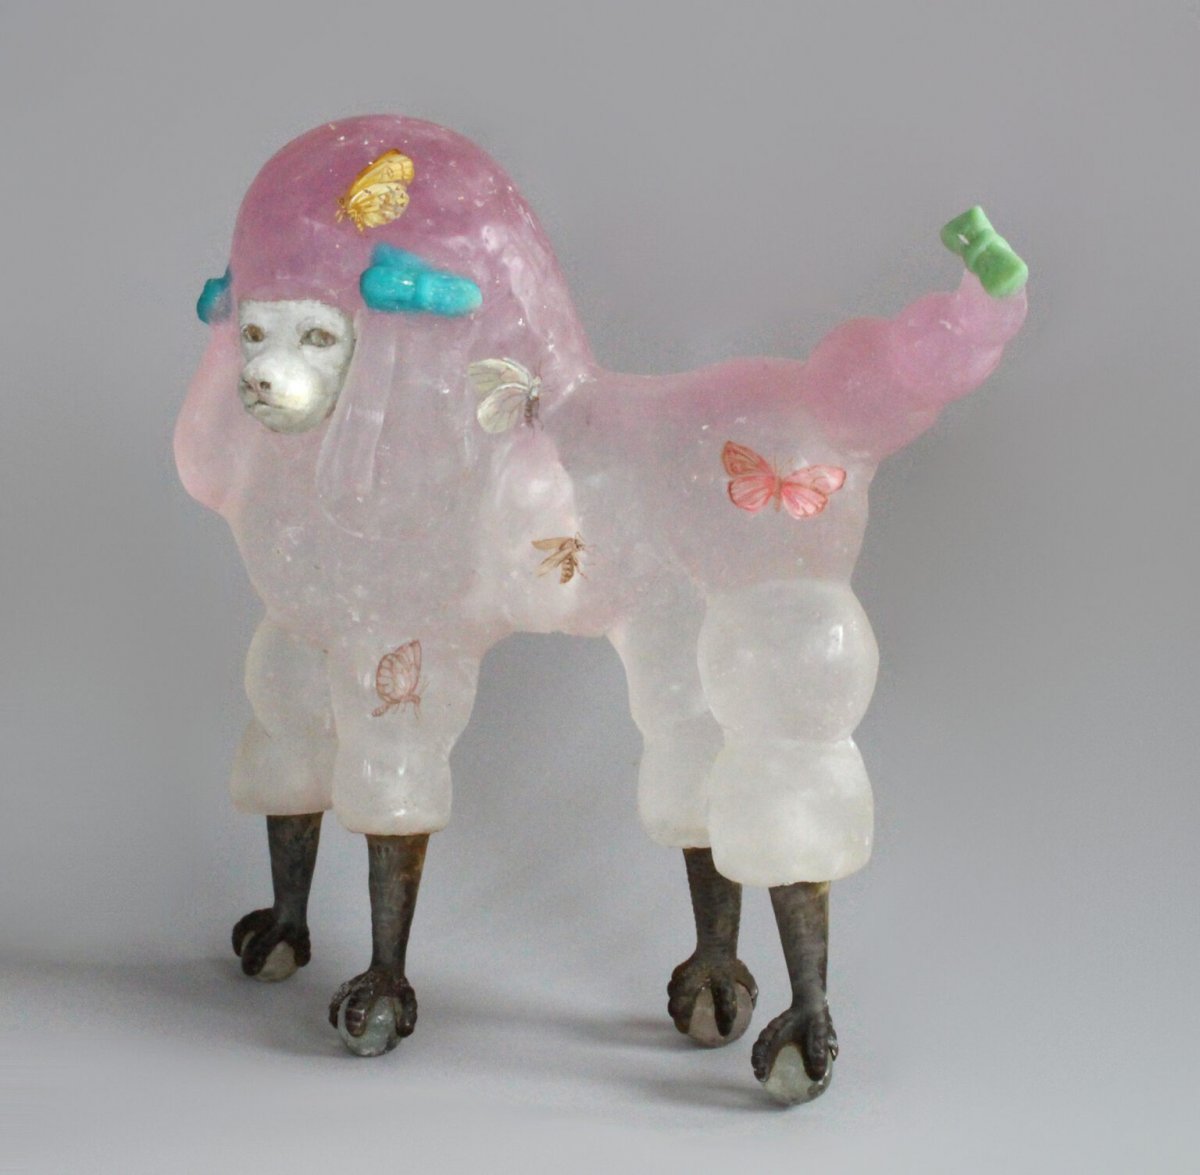 Ethereal Surrealist Sculptures Made Of Translucent Glass And Clay By Christina Bothwell 6